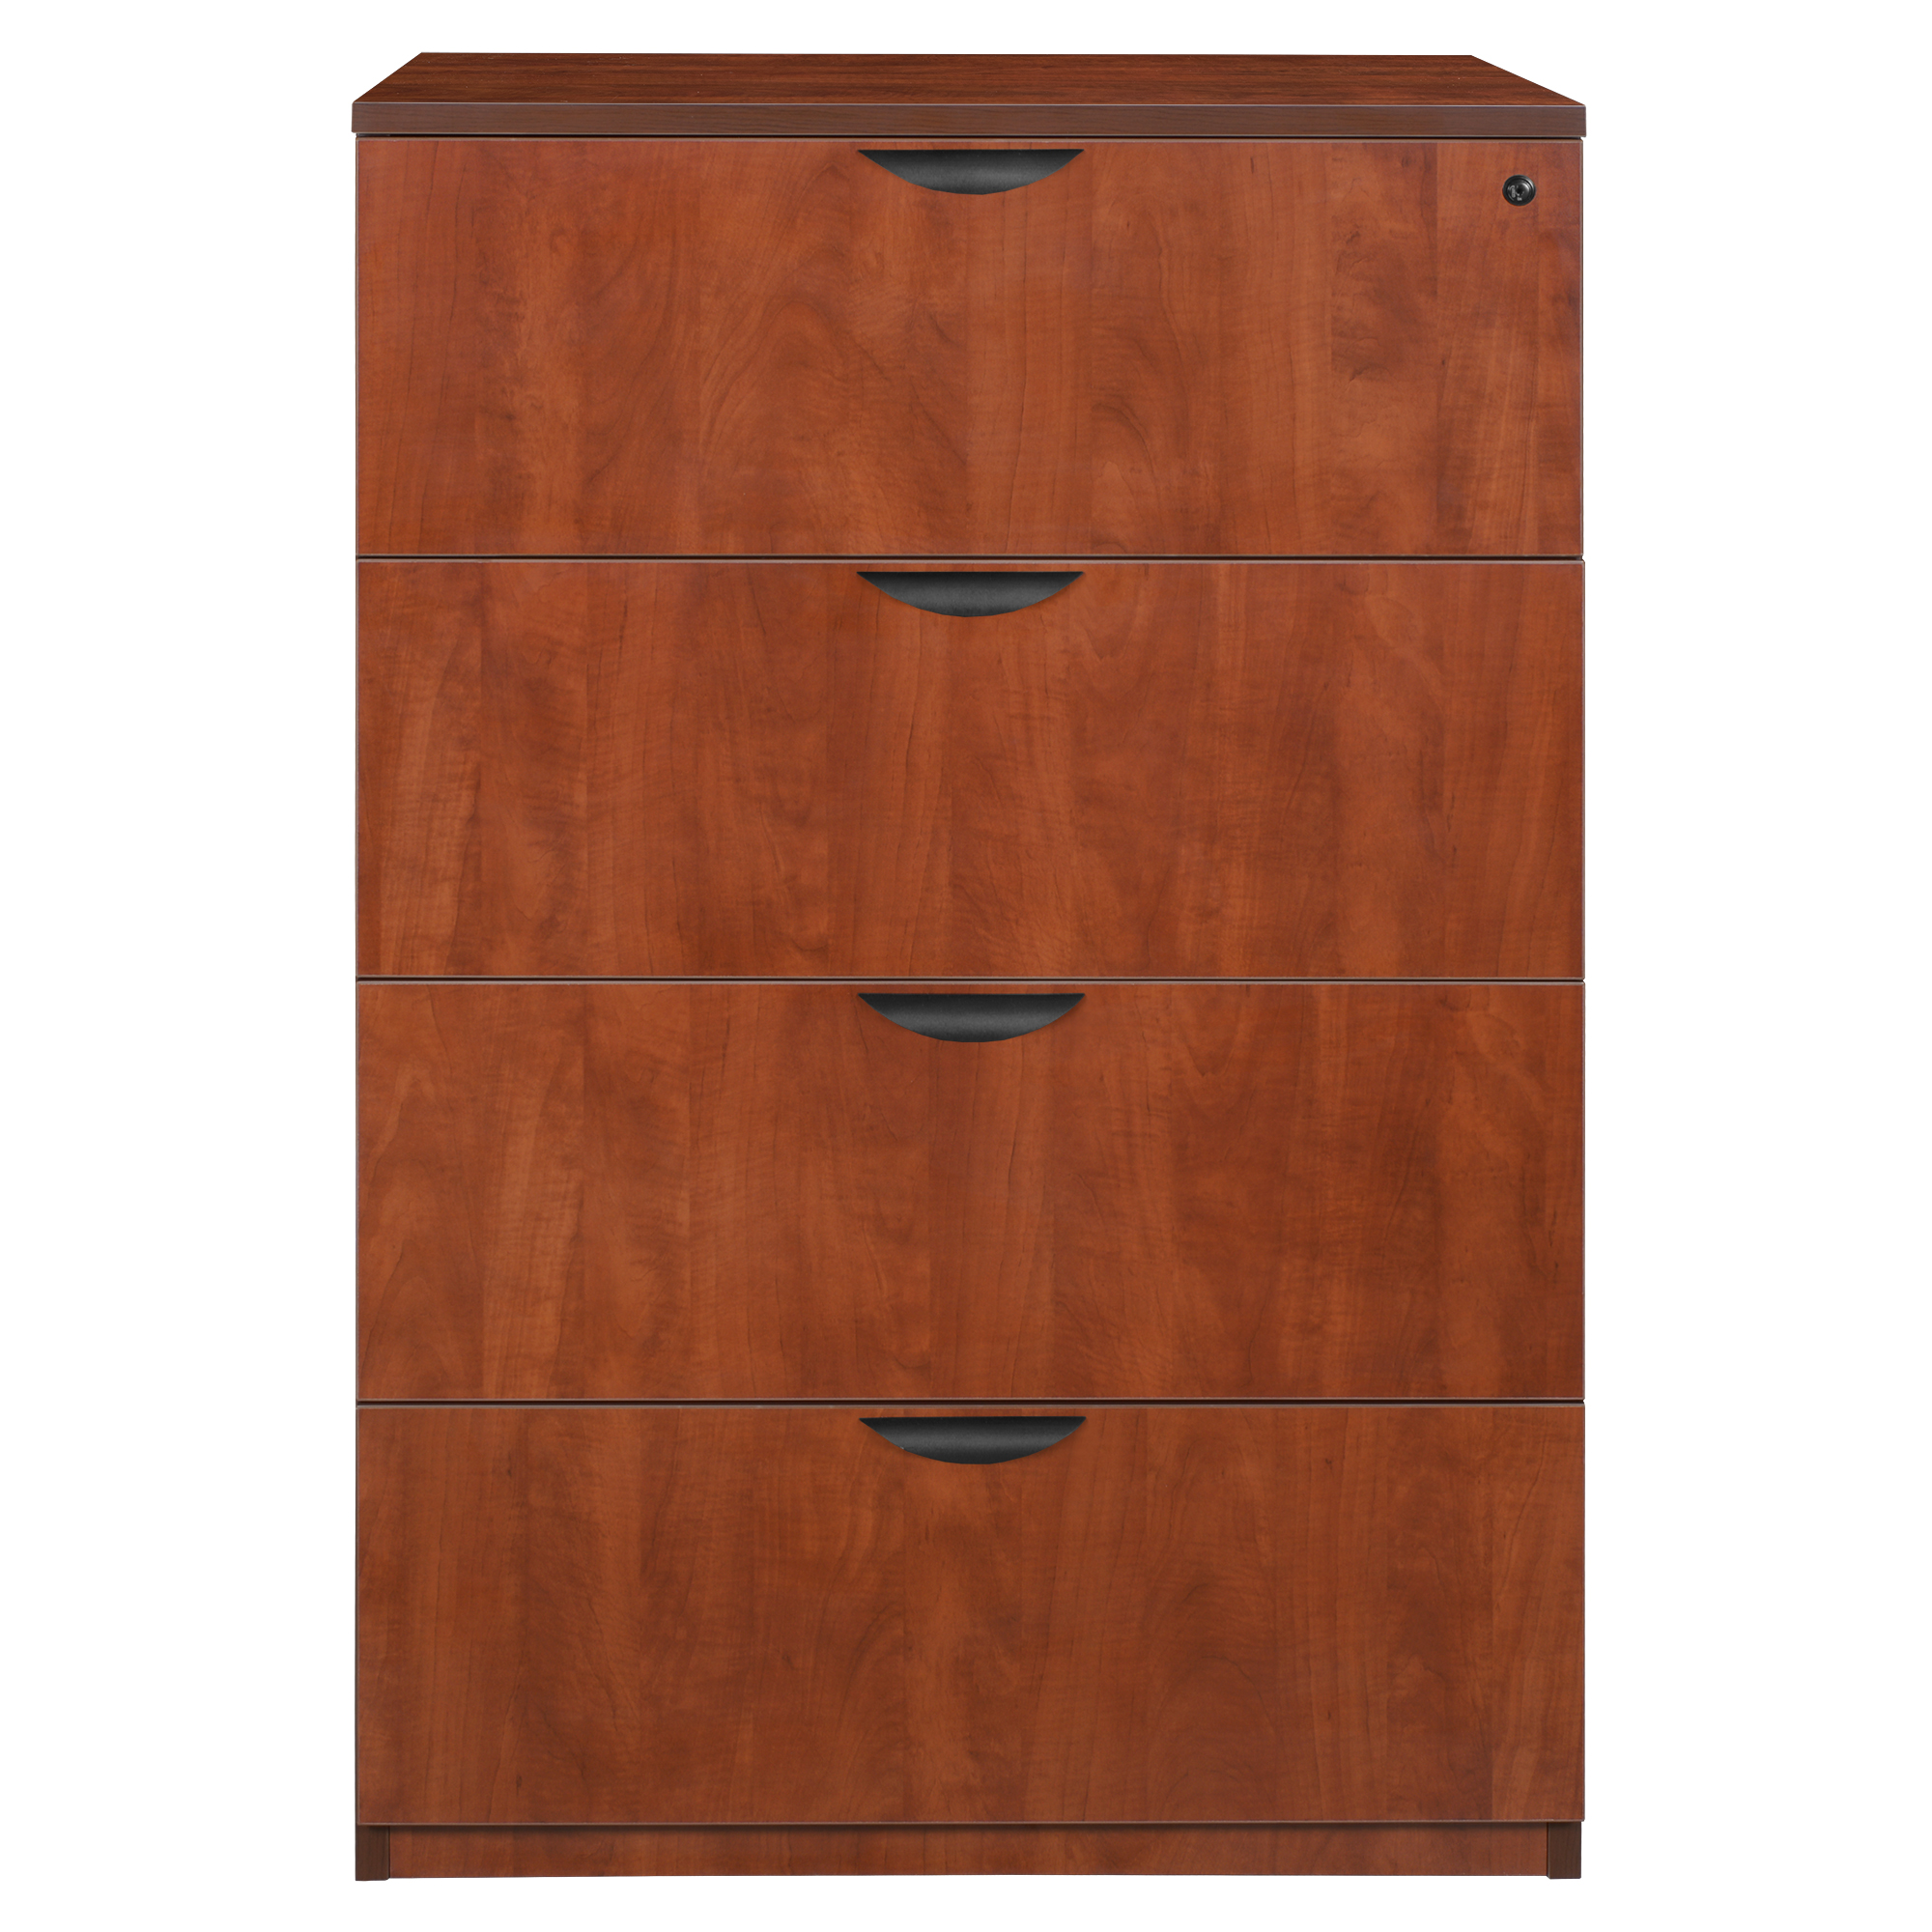 Legacy 4-Drawer Lateral File- Cherry - image 3 of 8